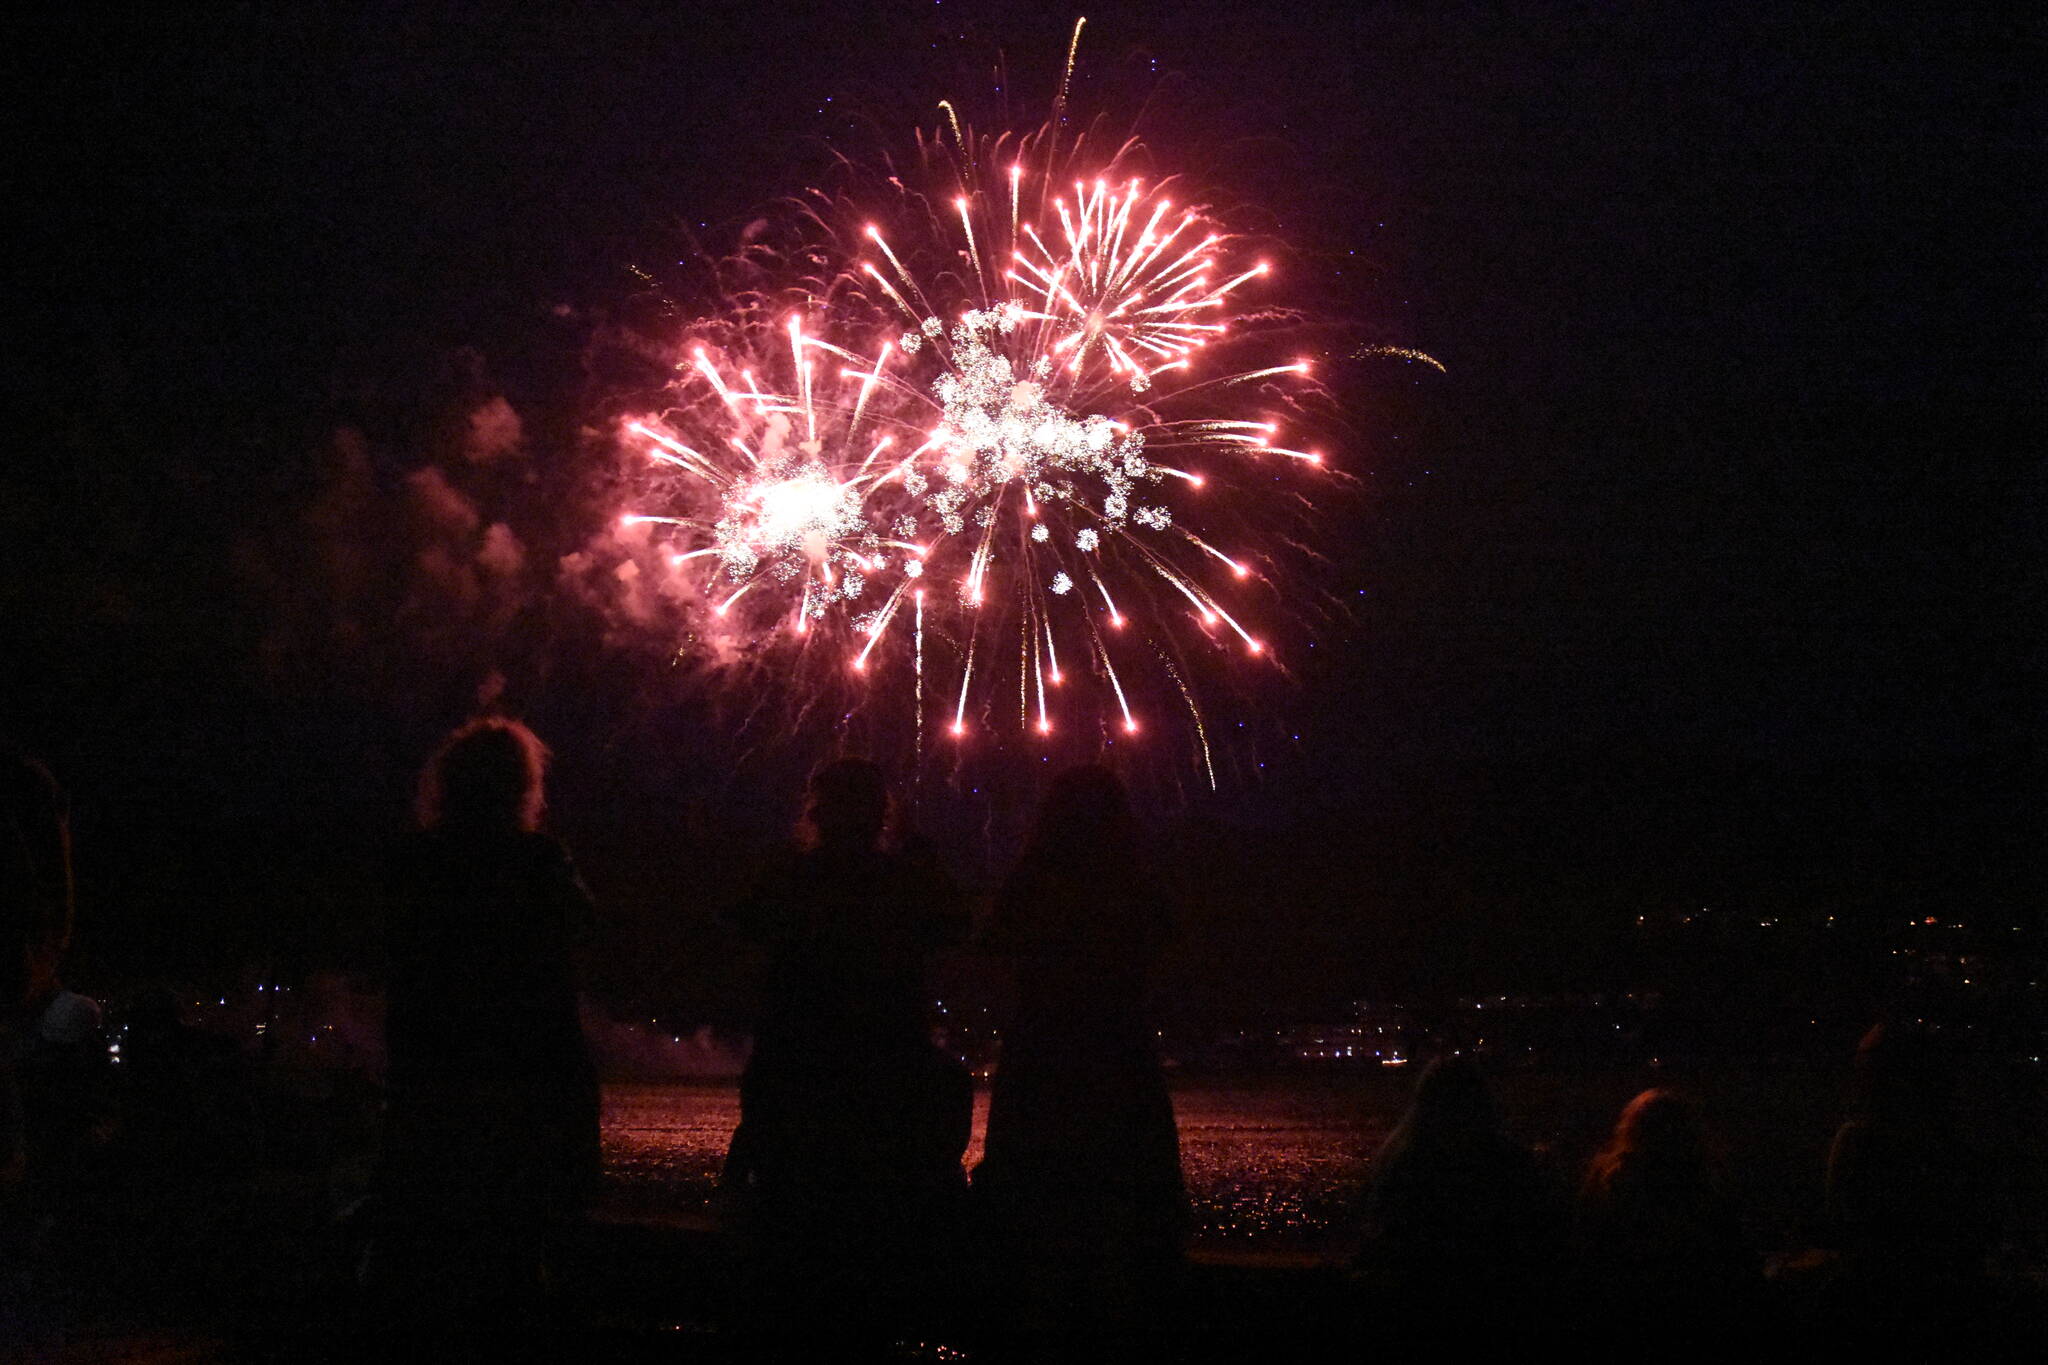 Rockets’ red glare illuminates the night sky and spectators during the City and Borough of Juneau’s fireworks display on July 3, 2021. (Peter Segall / Juneau Empire File)